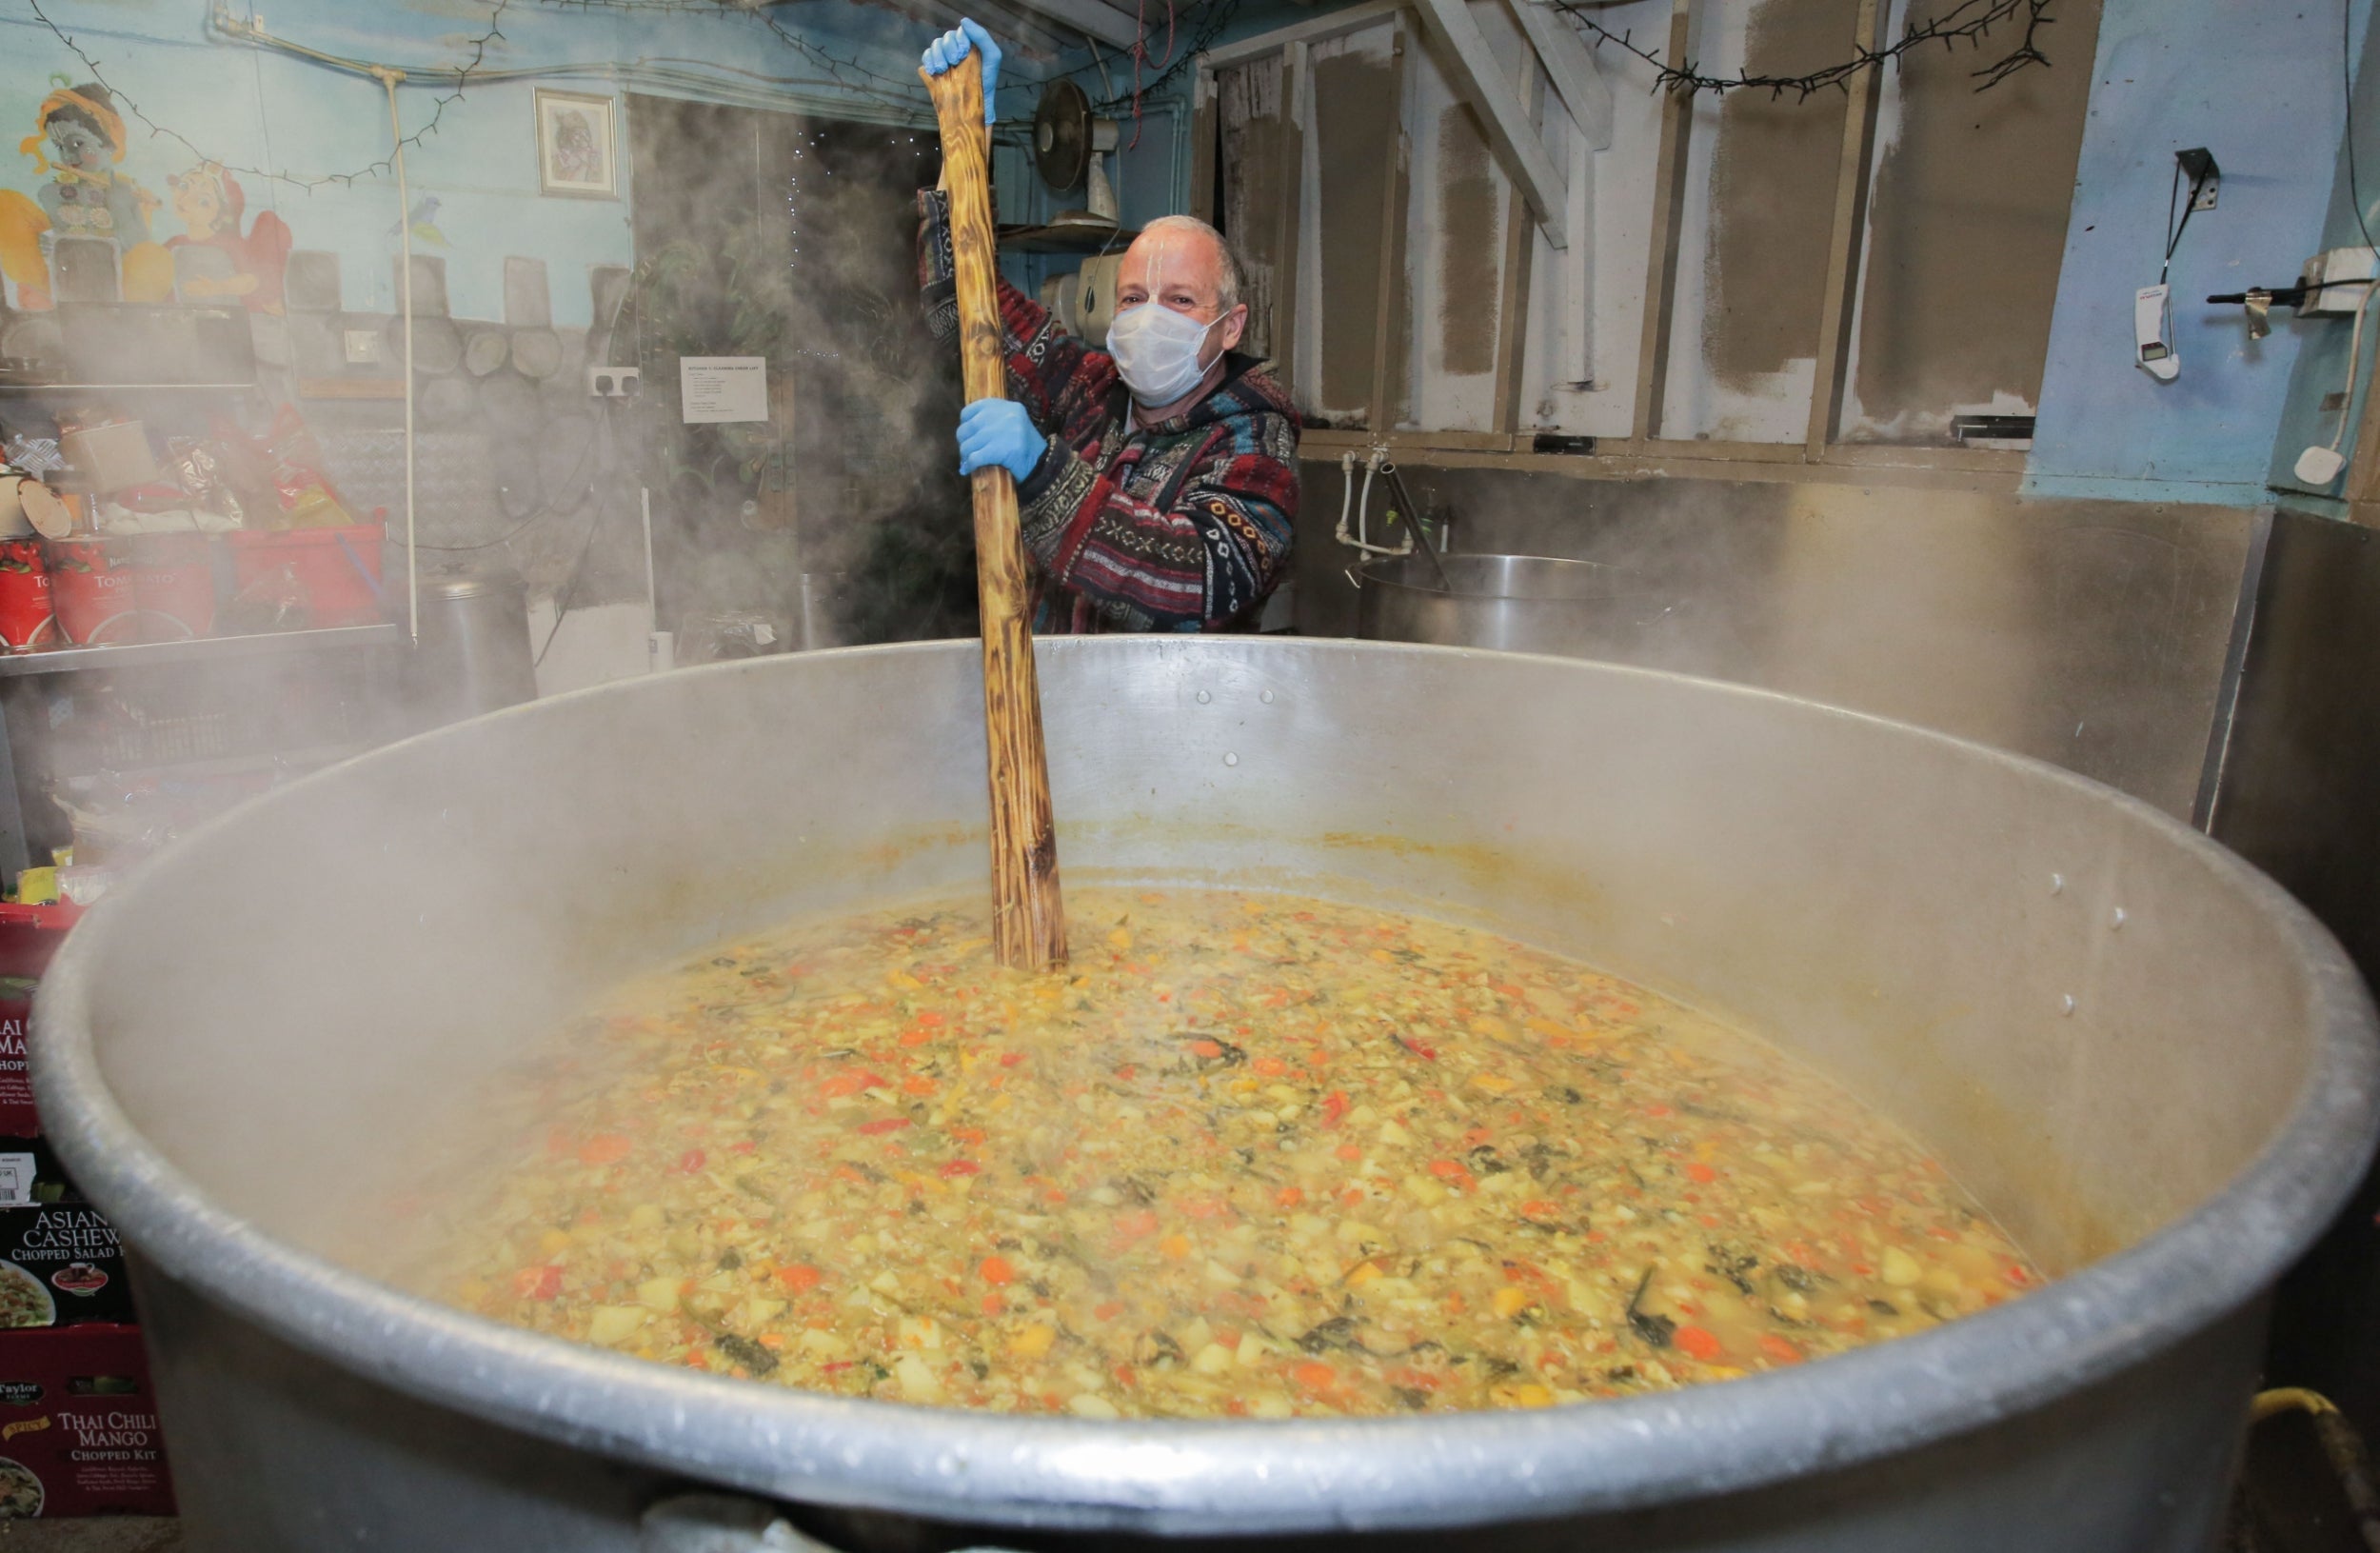 Cooking For Haringey with Para stirring the giant cooking pot containing a vegetable curry dish with a boating oar at their headquarters in the City of London